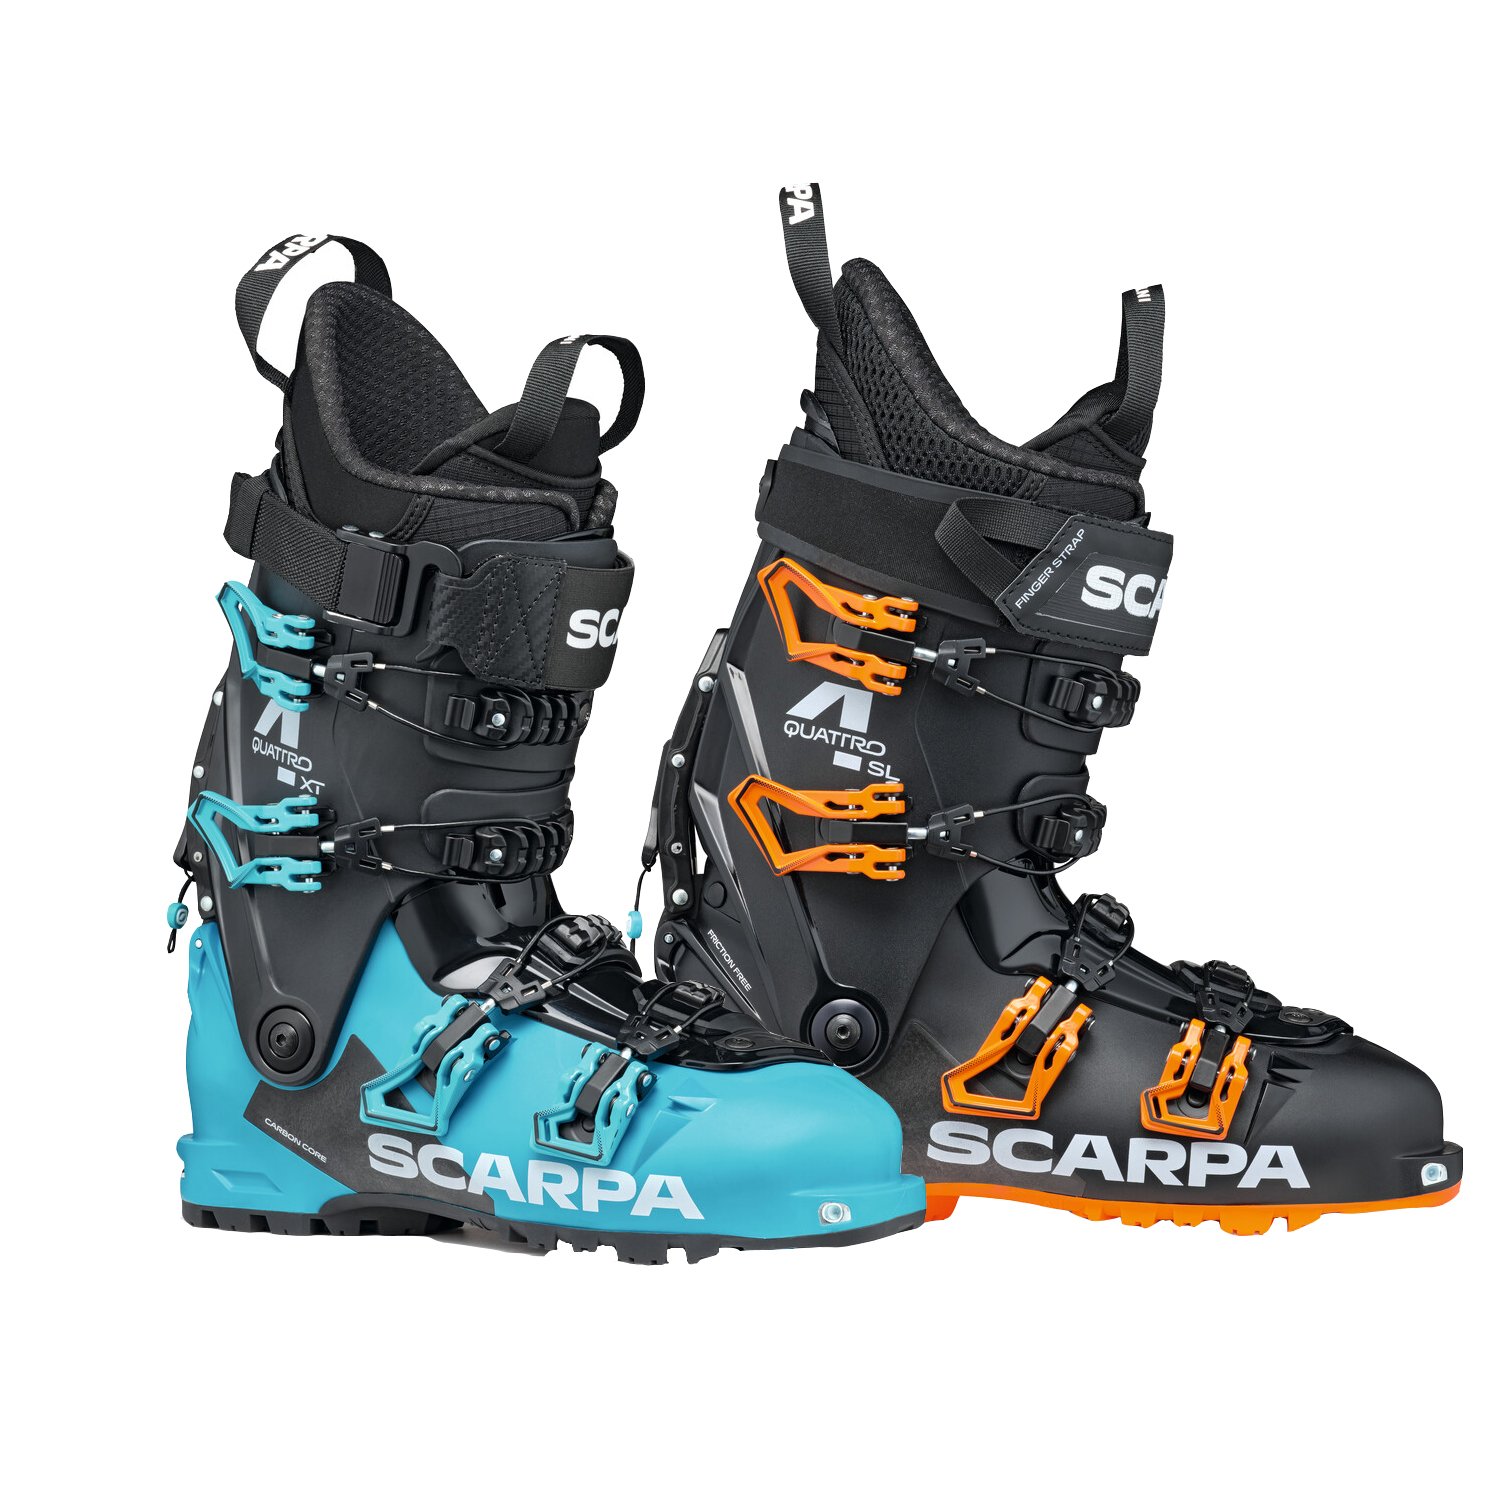 SCARPA Ski Boot Overview for Winter Summit NW